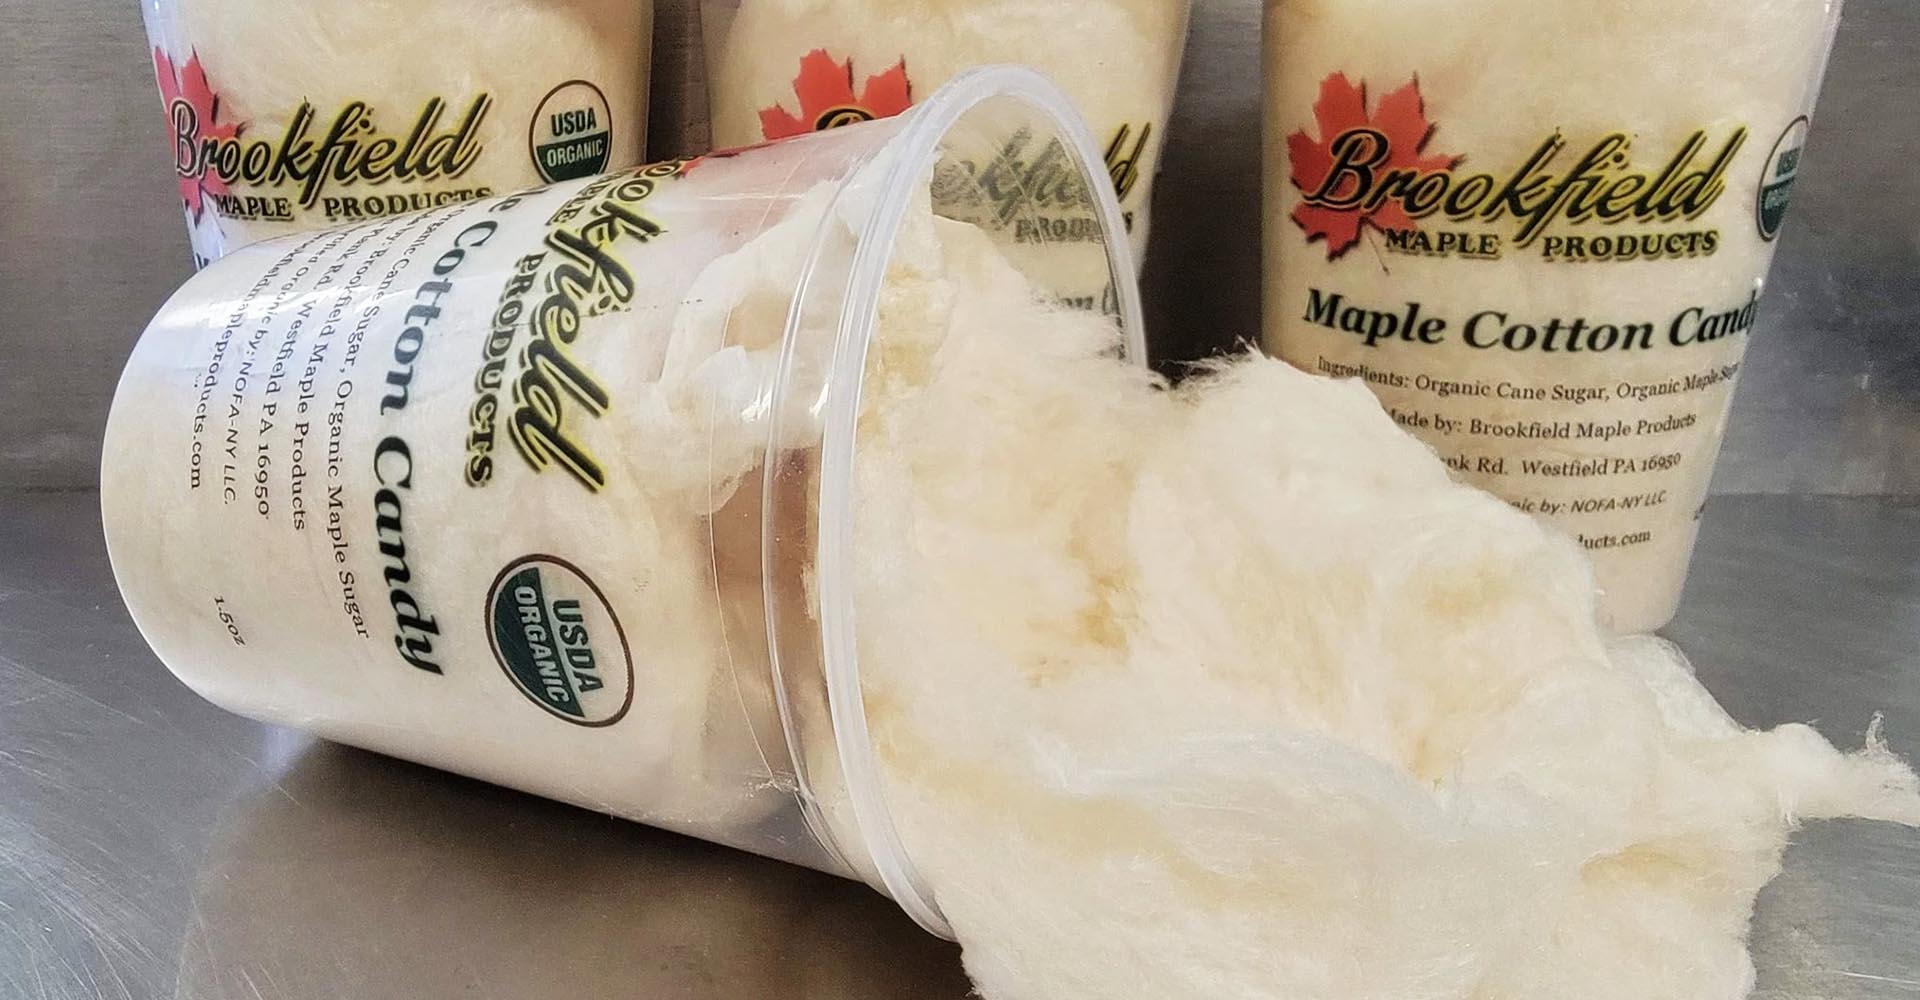 Brookfield Maple Products Organic Maple Cotton Candy